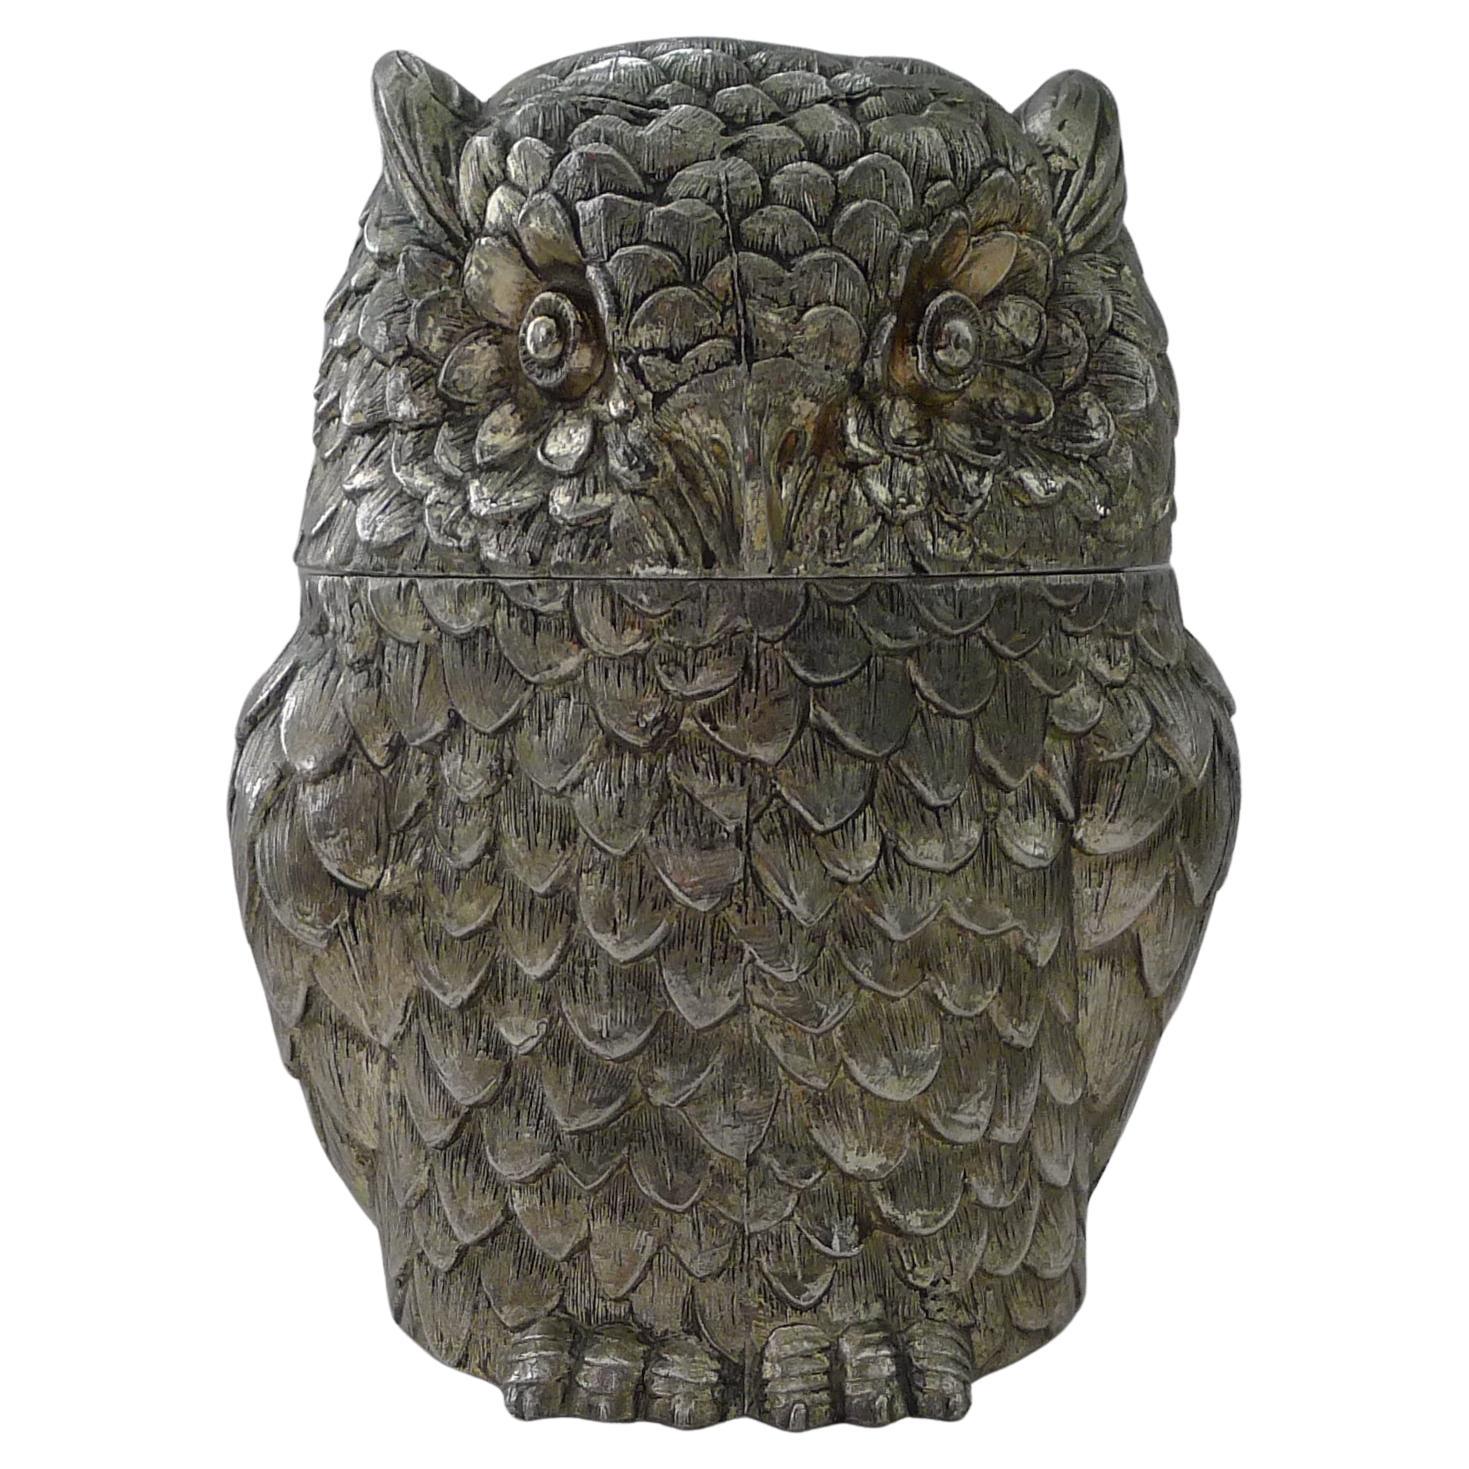 Mauro Manetti, Florence, Italy - Owl Ice Bucket c.1960 For Sale